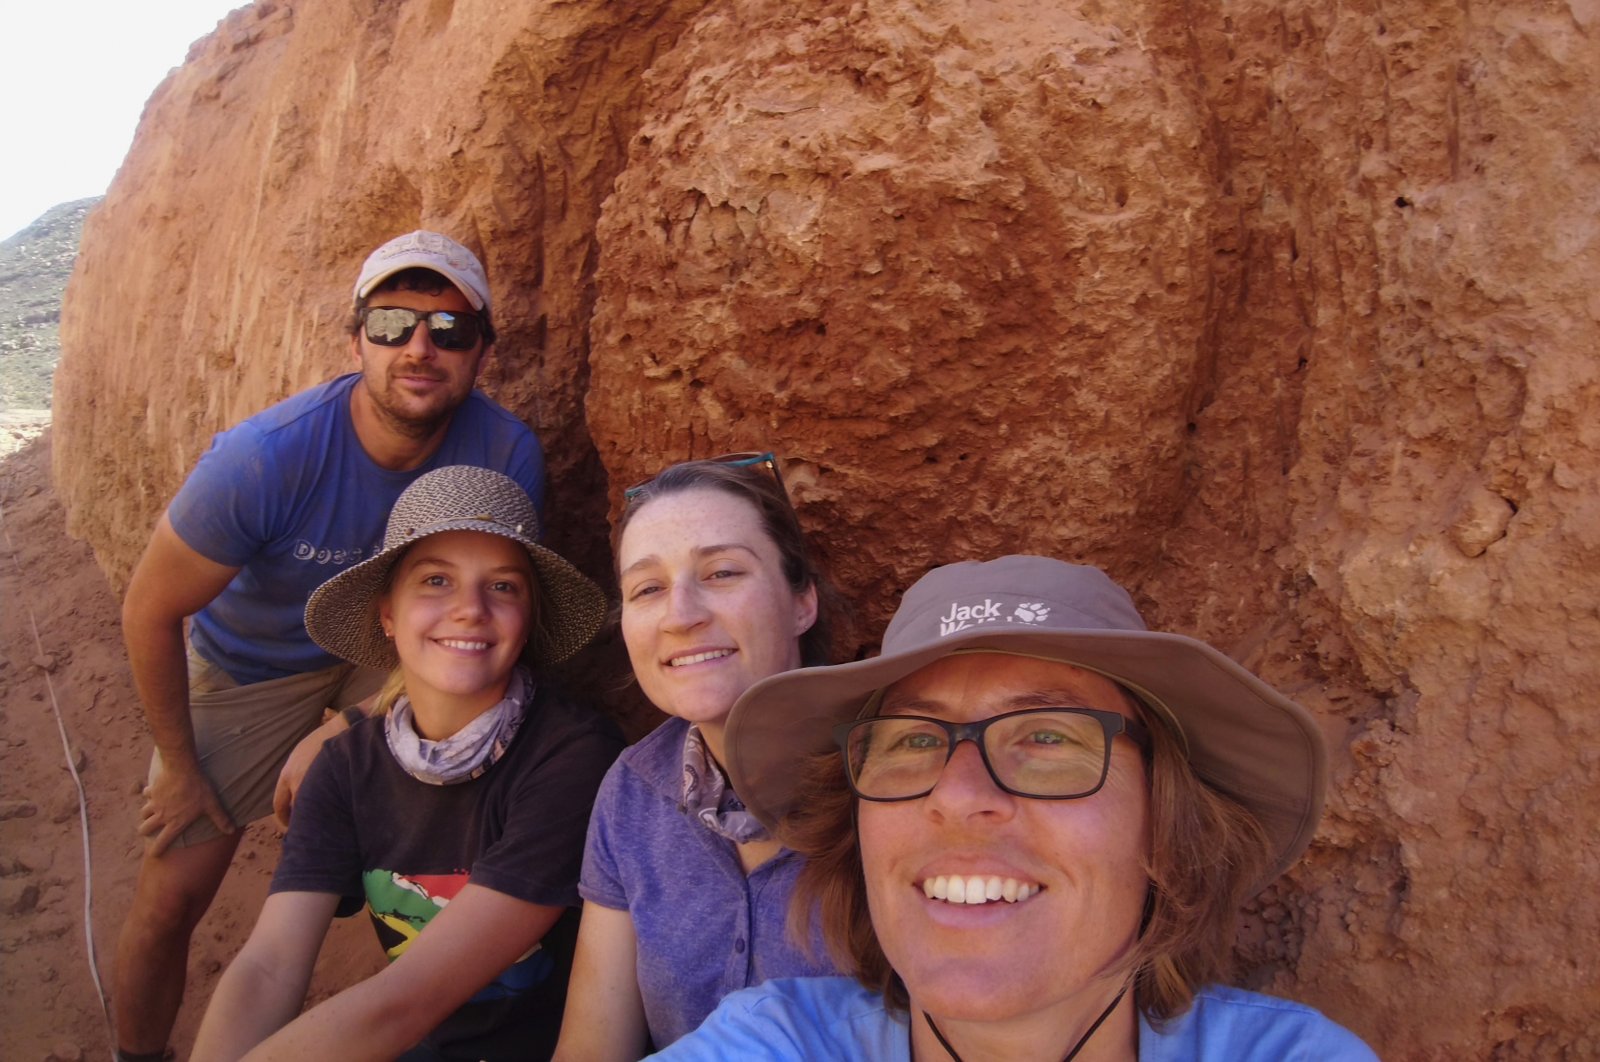 Michele Francis (R) and other researchers pose for a selfie next to an ancient termite mound in Namaqualand, South Africa, Sept. 15, 2018. (AP Photo)